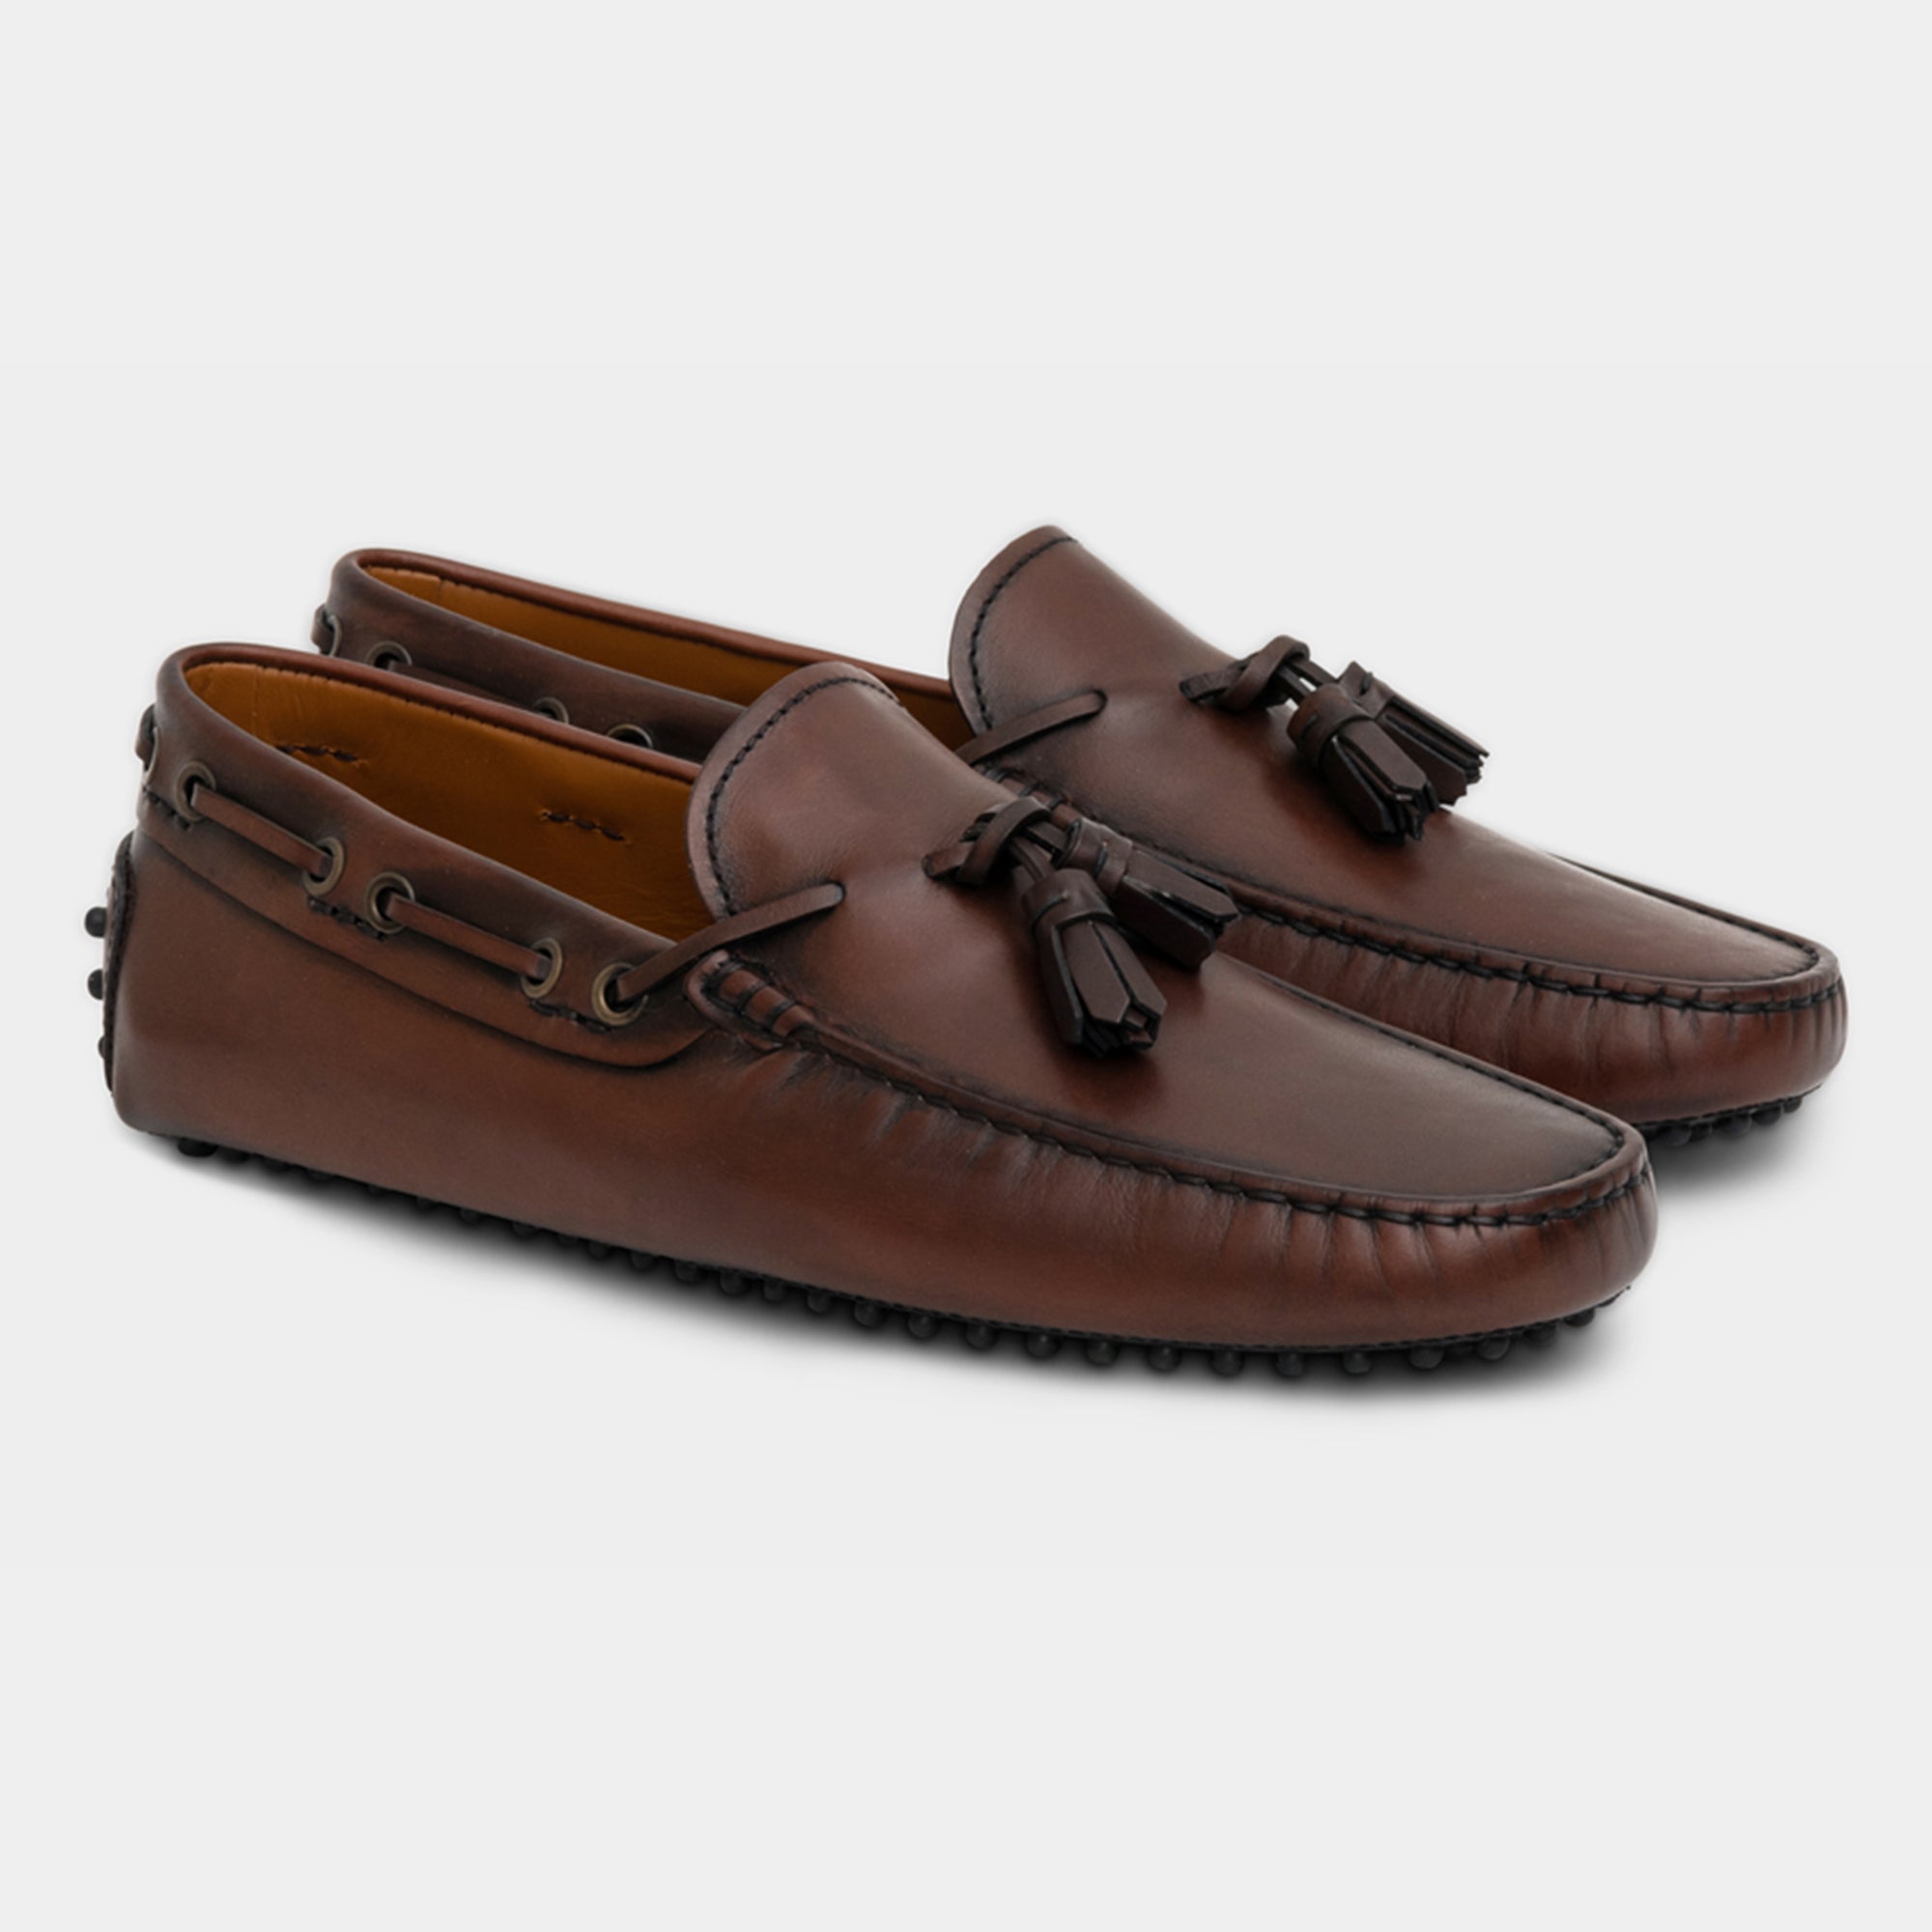 Pigottee | Men's brown leather Moccasins with Tassels | Velasca